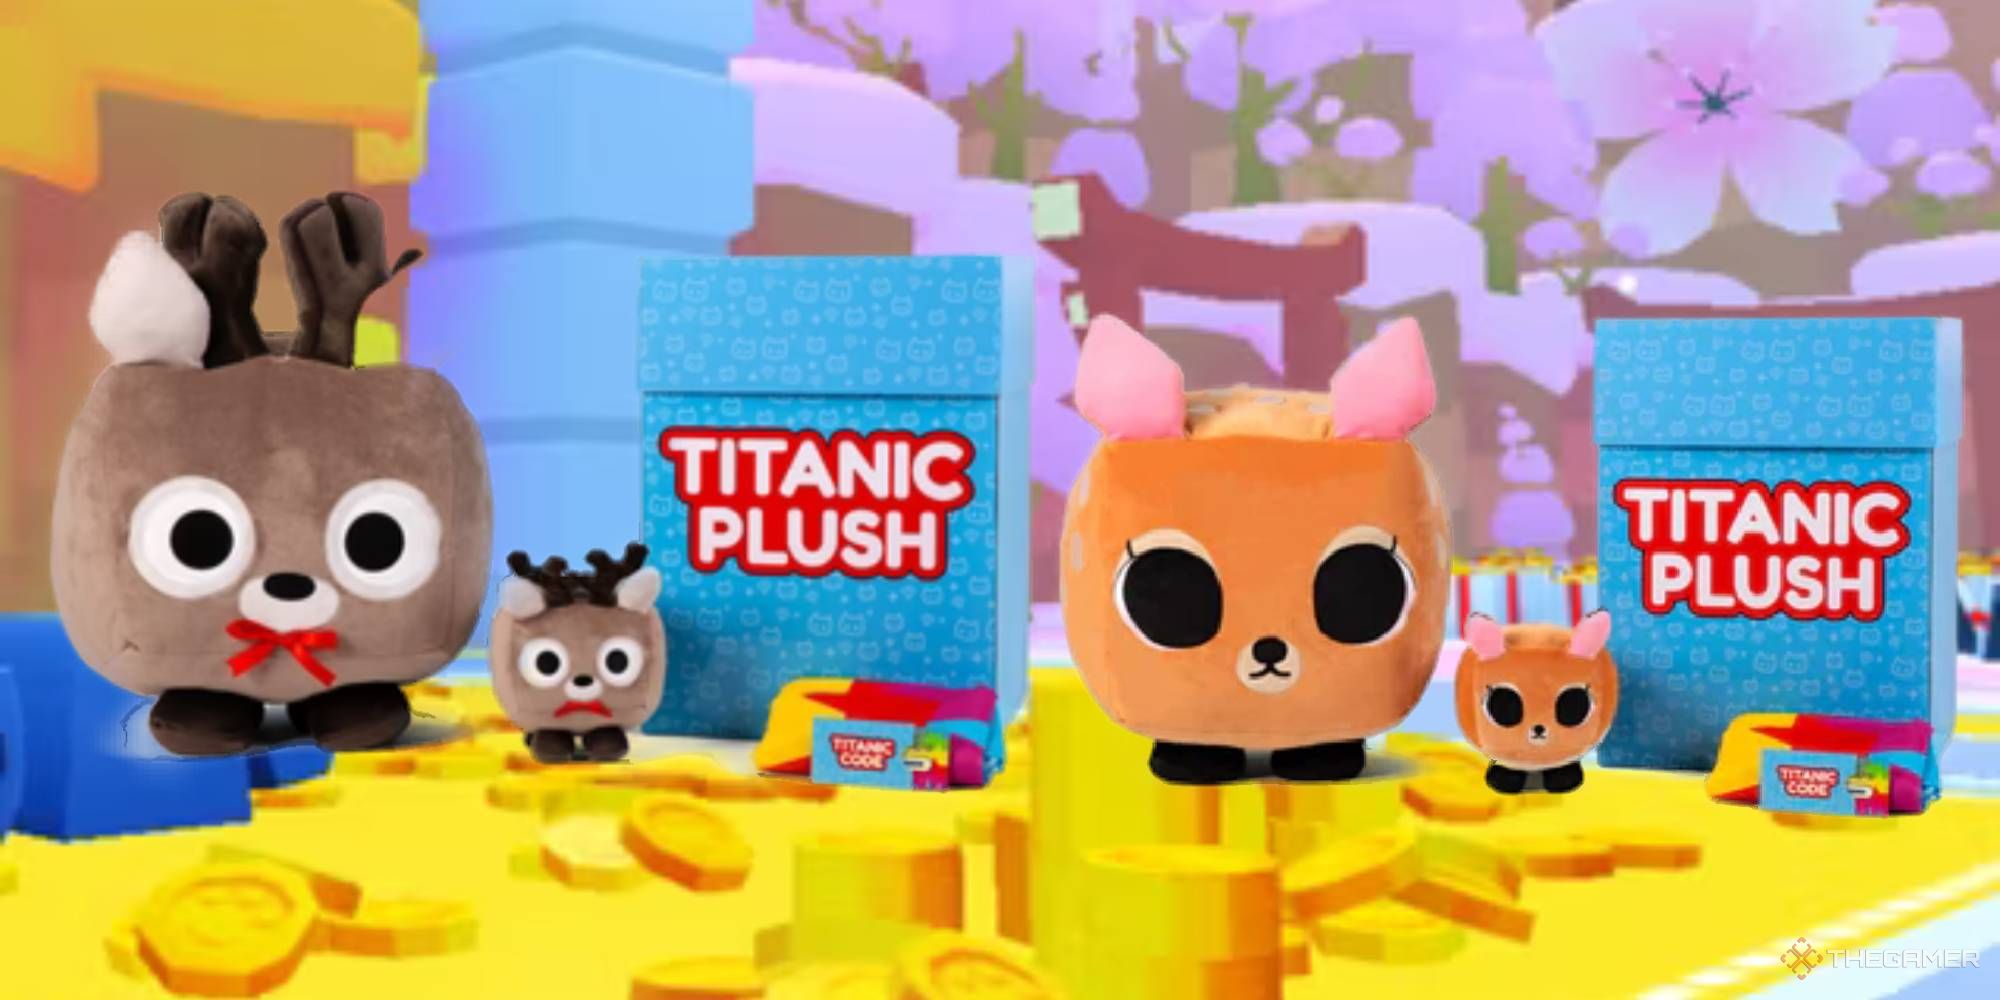 The Titanic Reindeer and Titanic Fawn plushes for Pet Simulator 99, against a backdrop of coin piles in-game